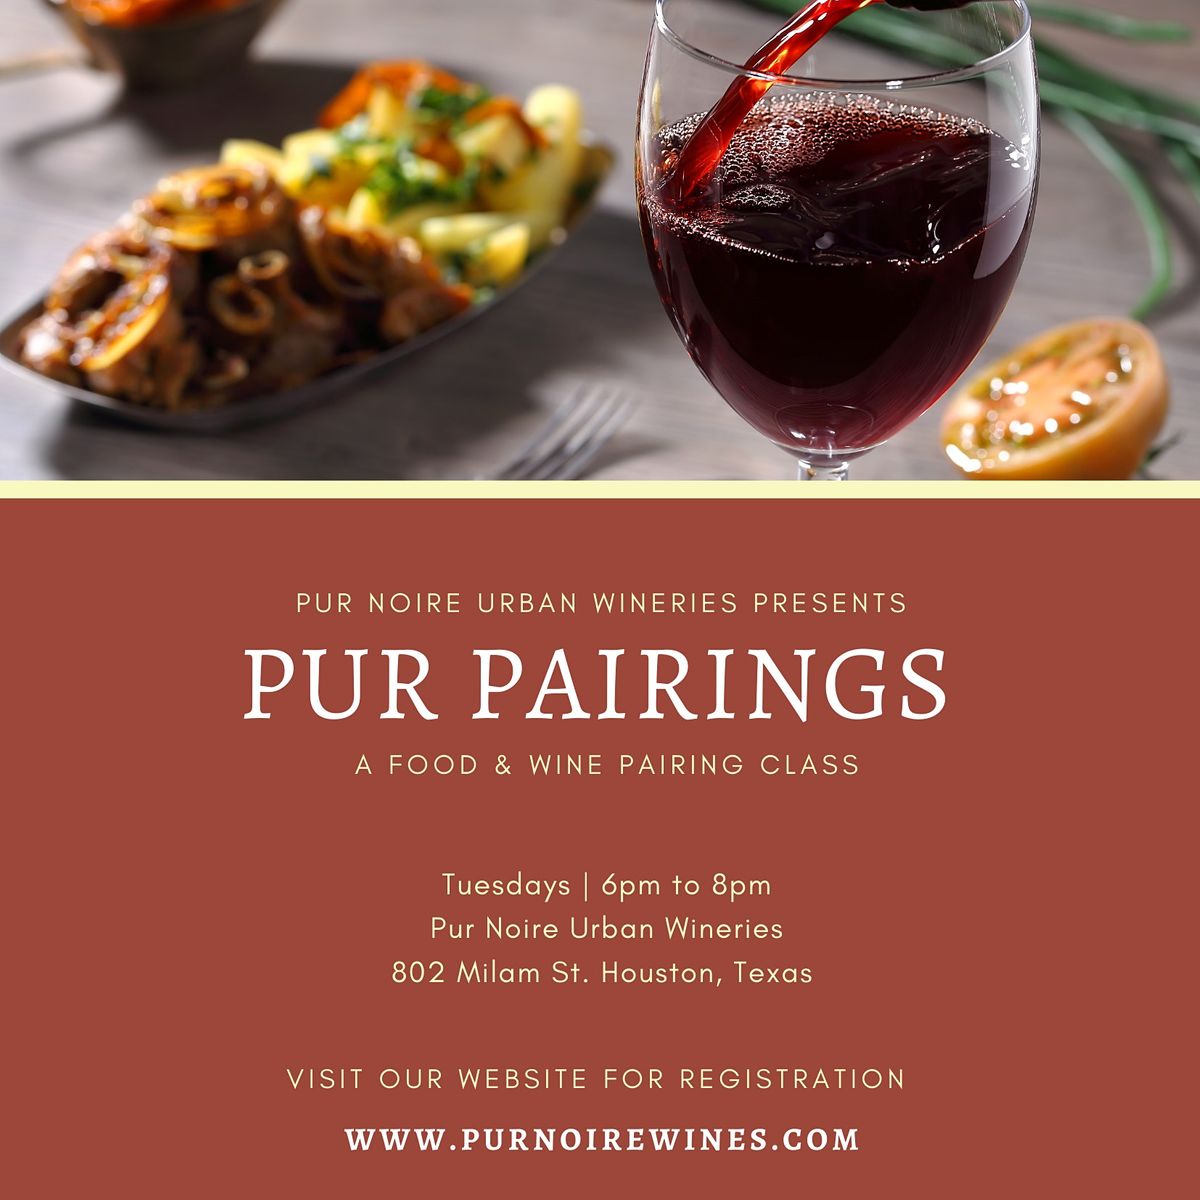 Pur Pairings: A Food & Wine Pairing Class